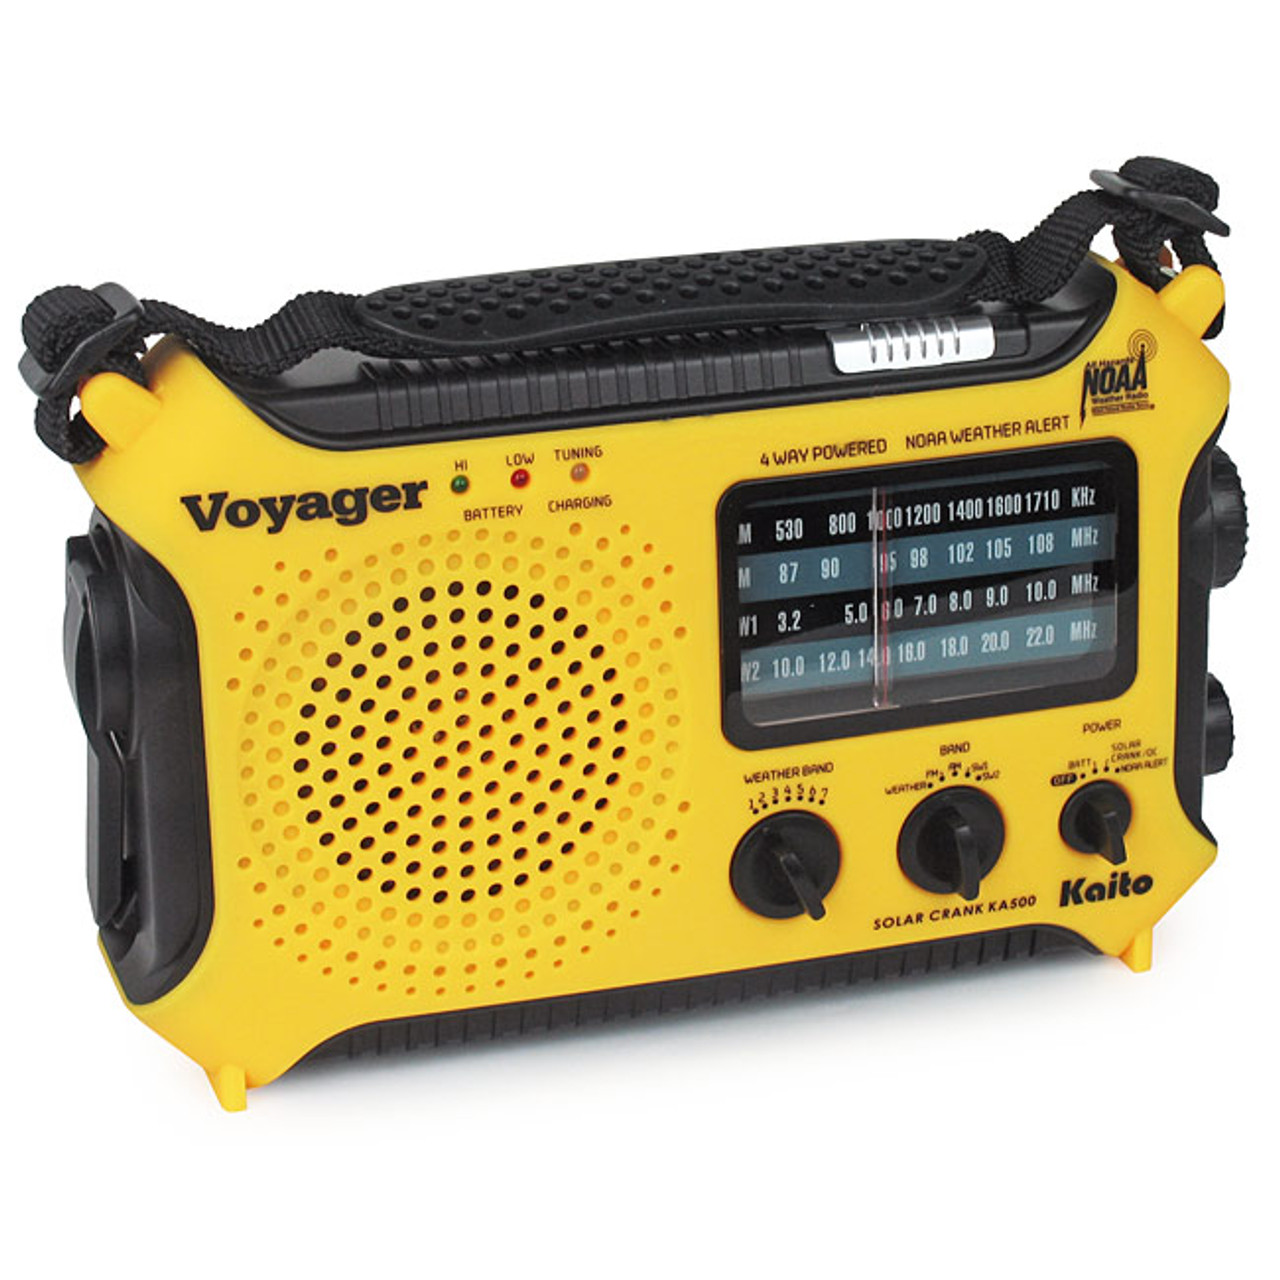 Emergency Radio with NOAA Weather Alert, Portable Solar Hand Crank AM/FM  Radio for Survival,Rechargeable Battery Powered Radio,USB